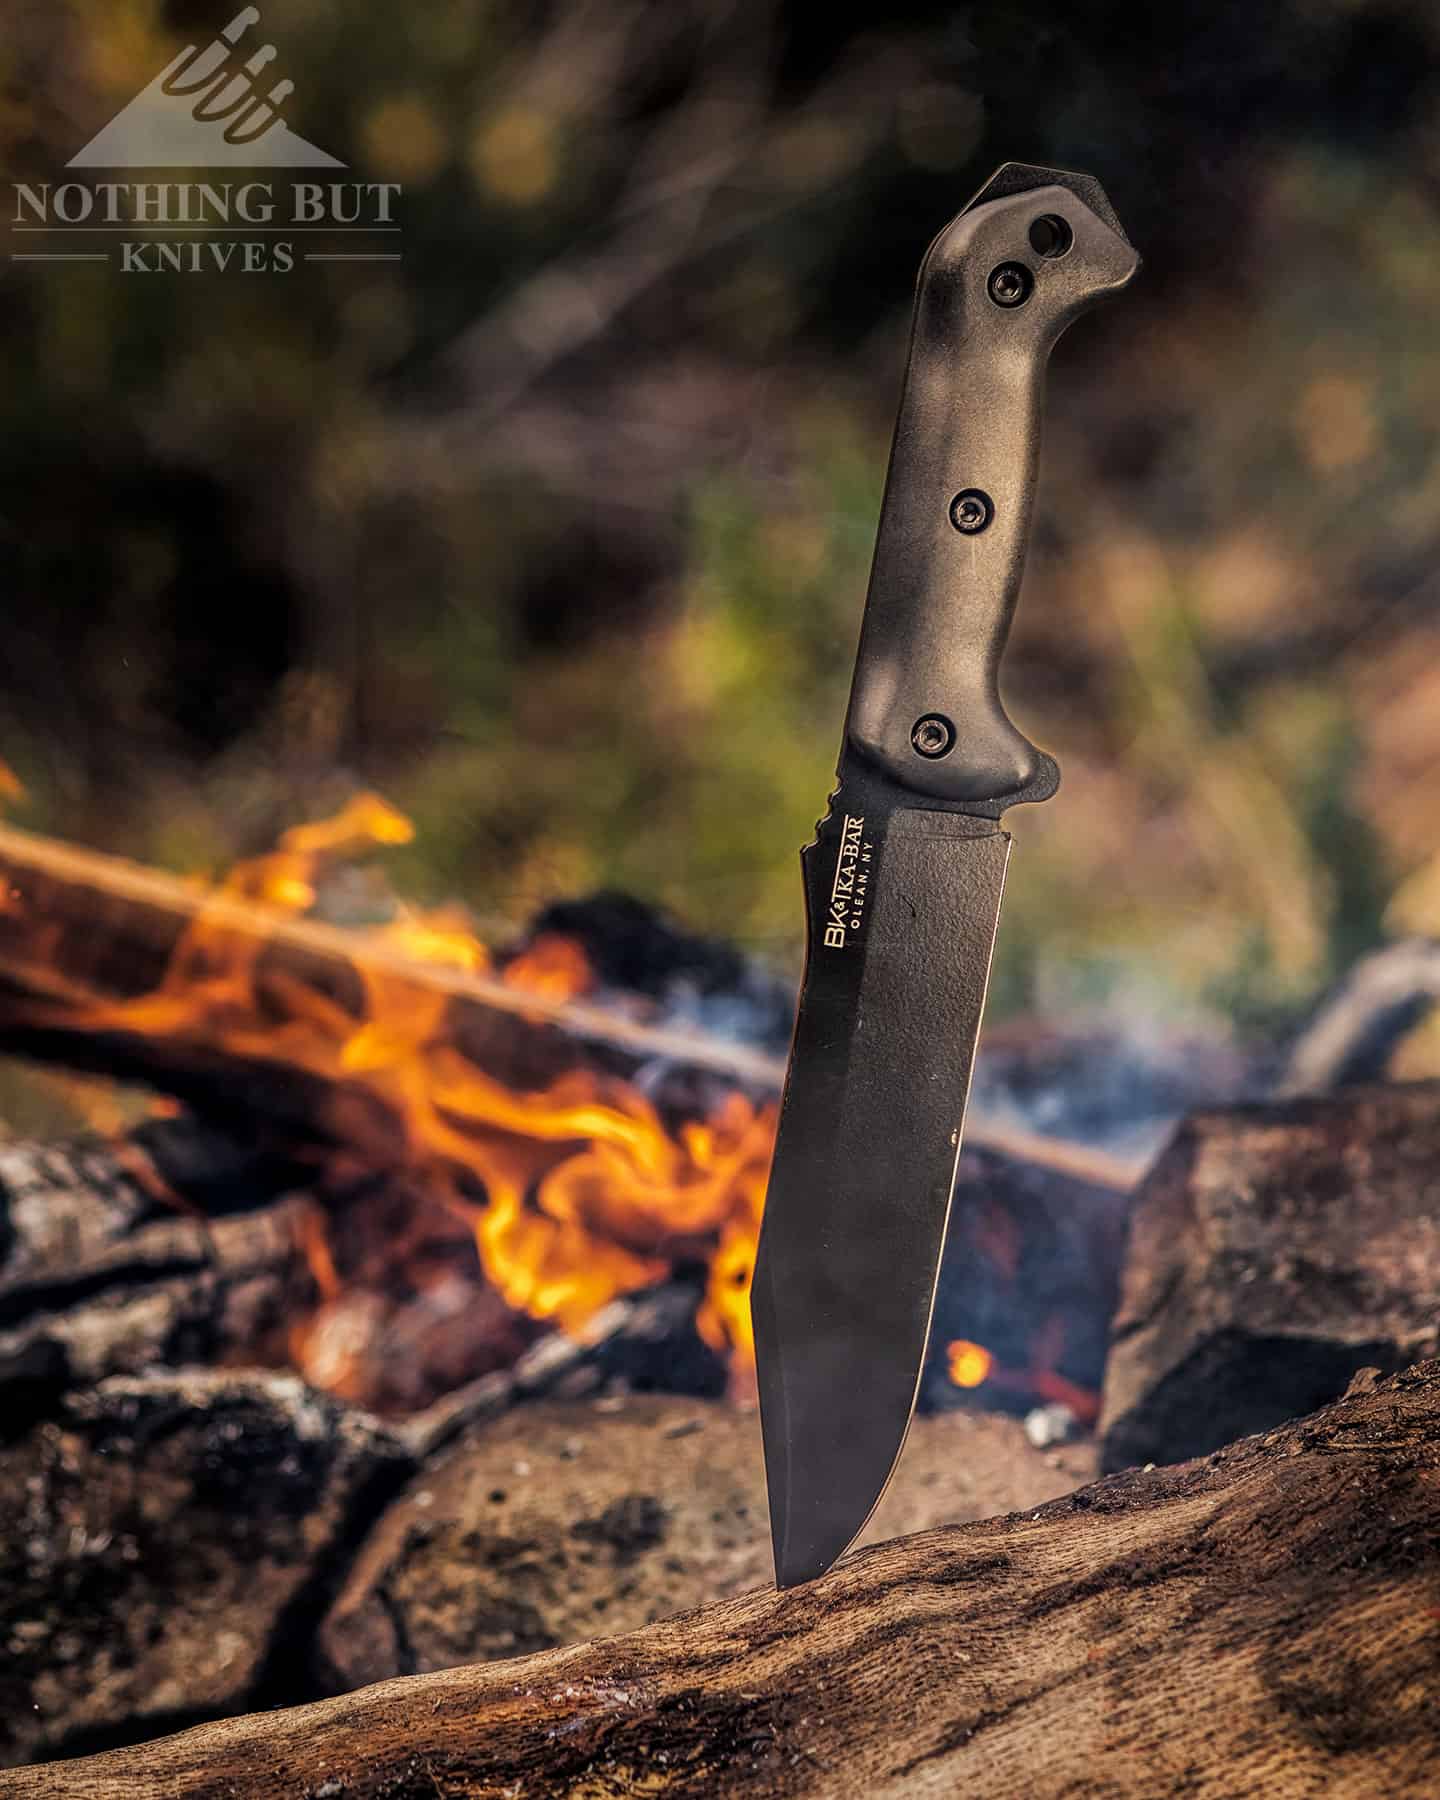 Camping with the Ka-Bar Becker  BK7 Bowie knife. 